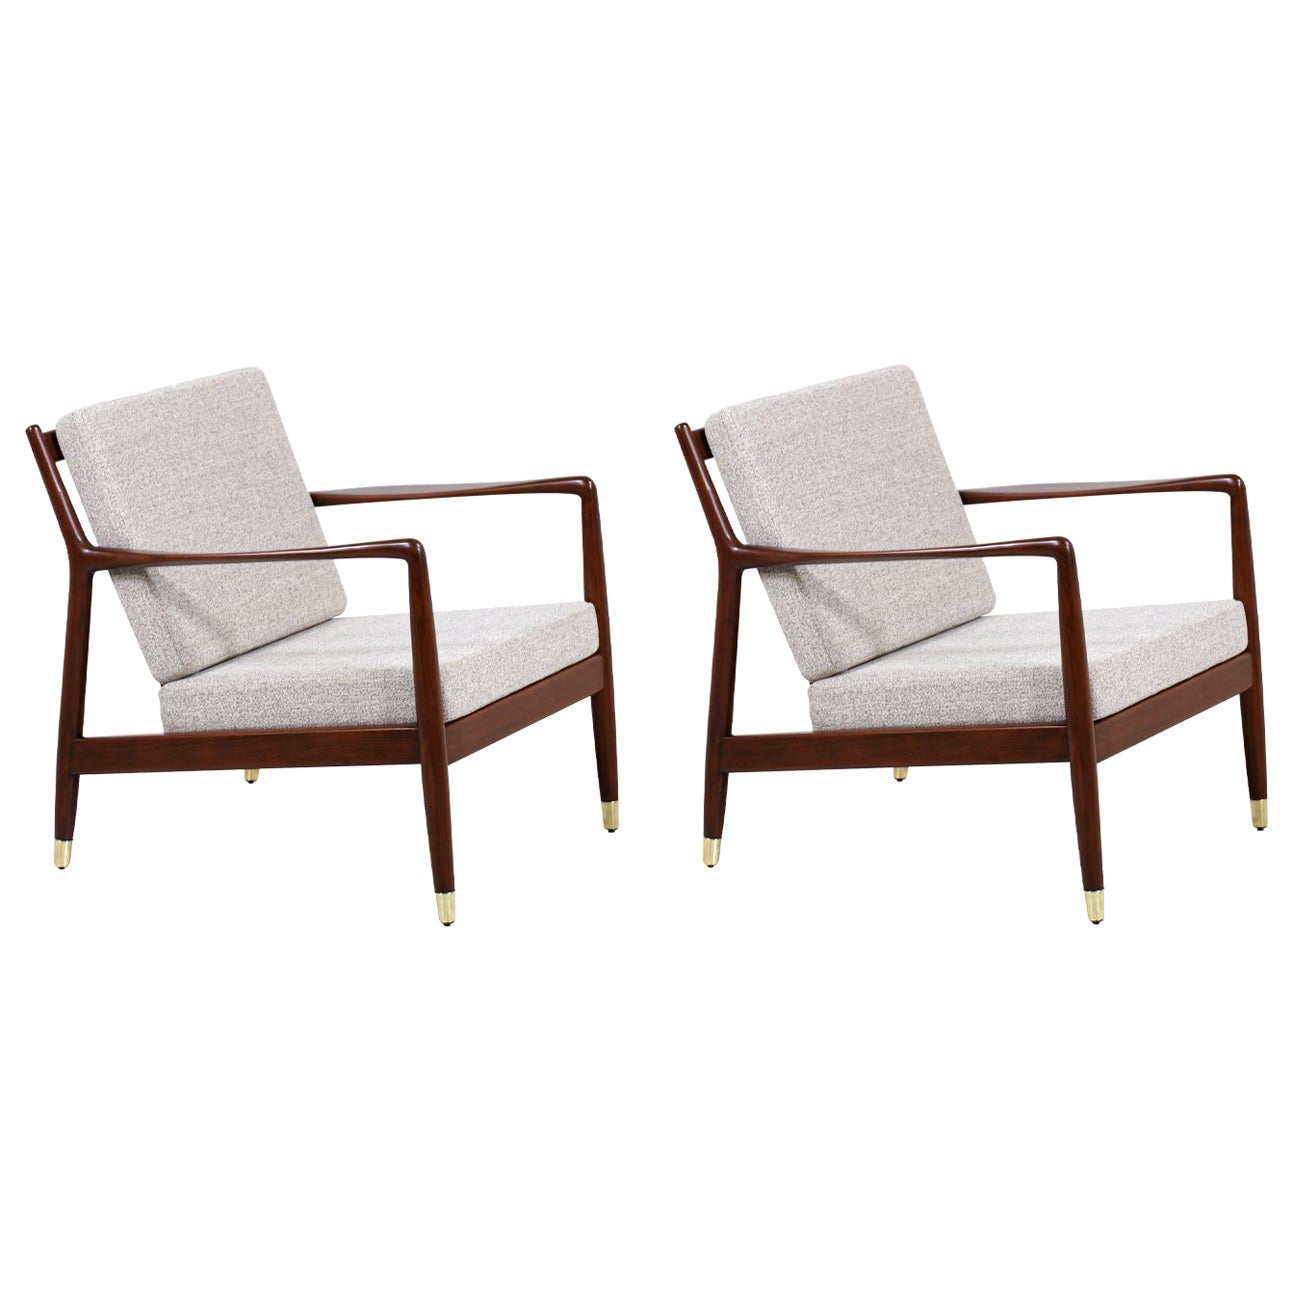 Folke Ohlsson Model USA-143 Lounge Chairs for DUX